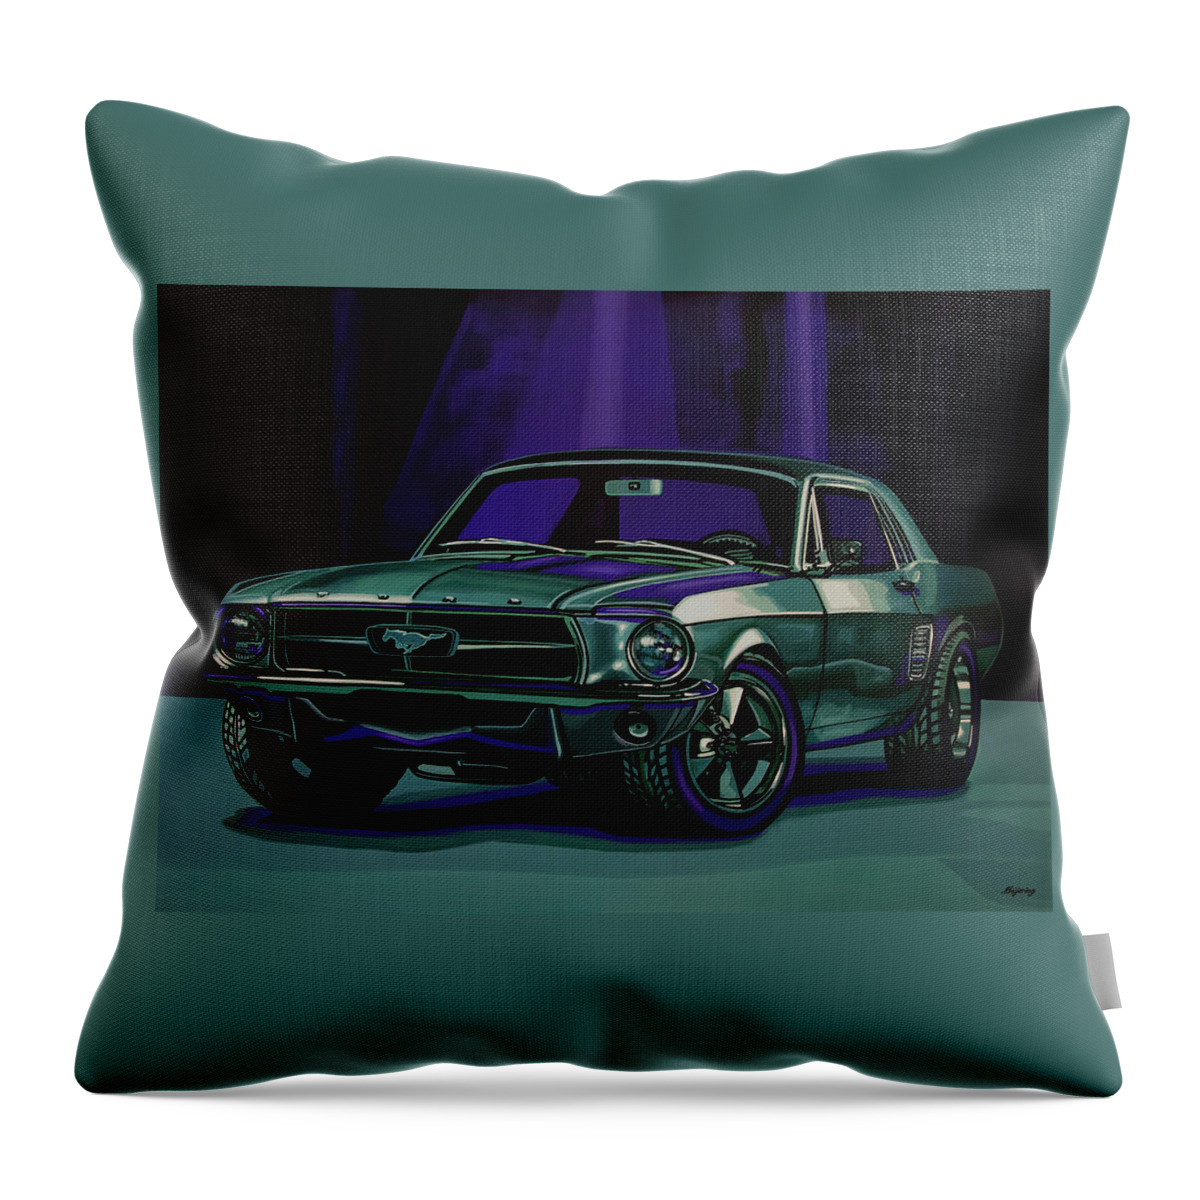 Ford Mustang Throw Pillow featuring the painting Ford Mustang 1967 Painting by Paul Meijering